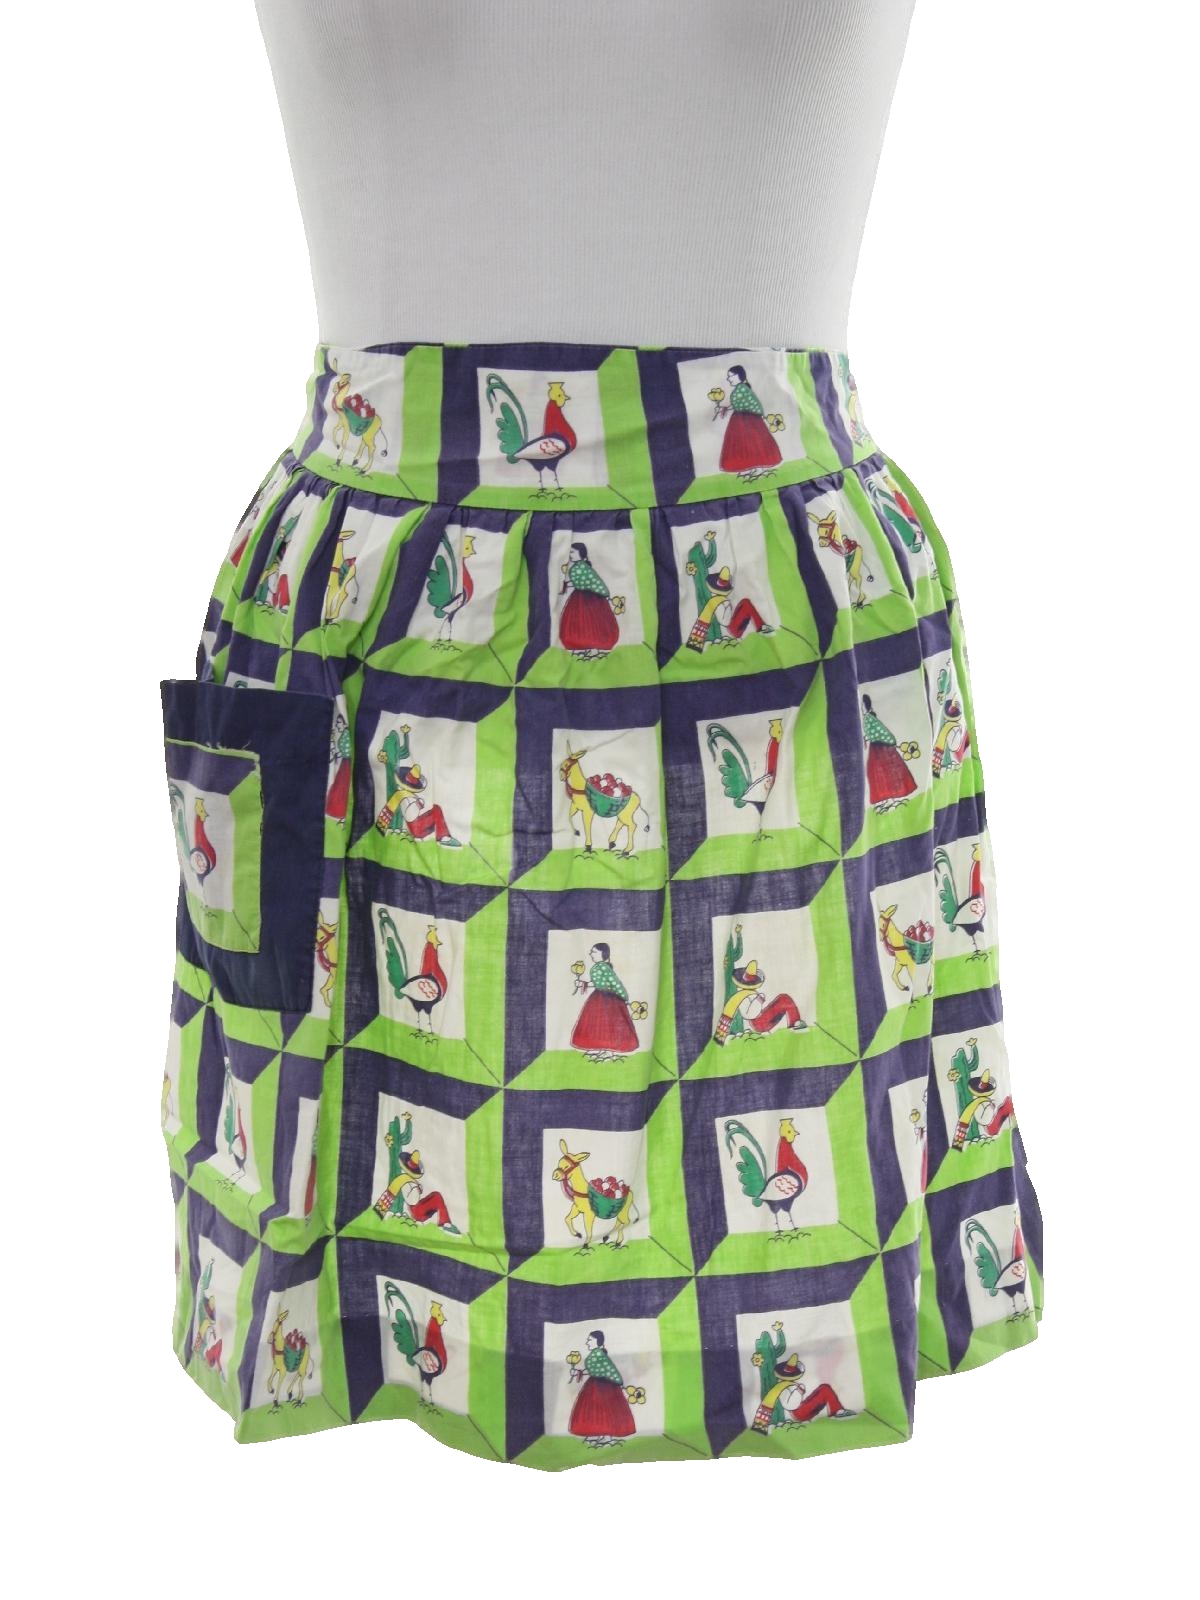 Retro 1960's Apron (Home Sewn) : 60s -Home Sewn- Aprons can be used as ...